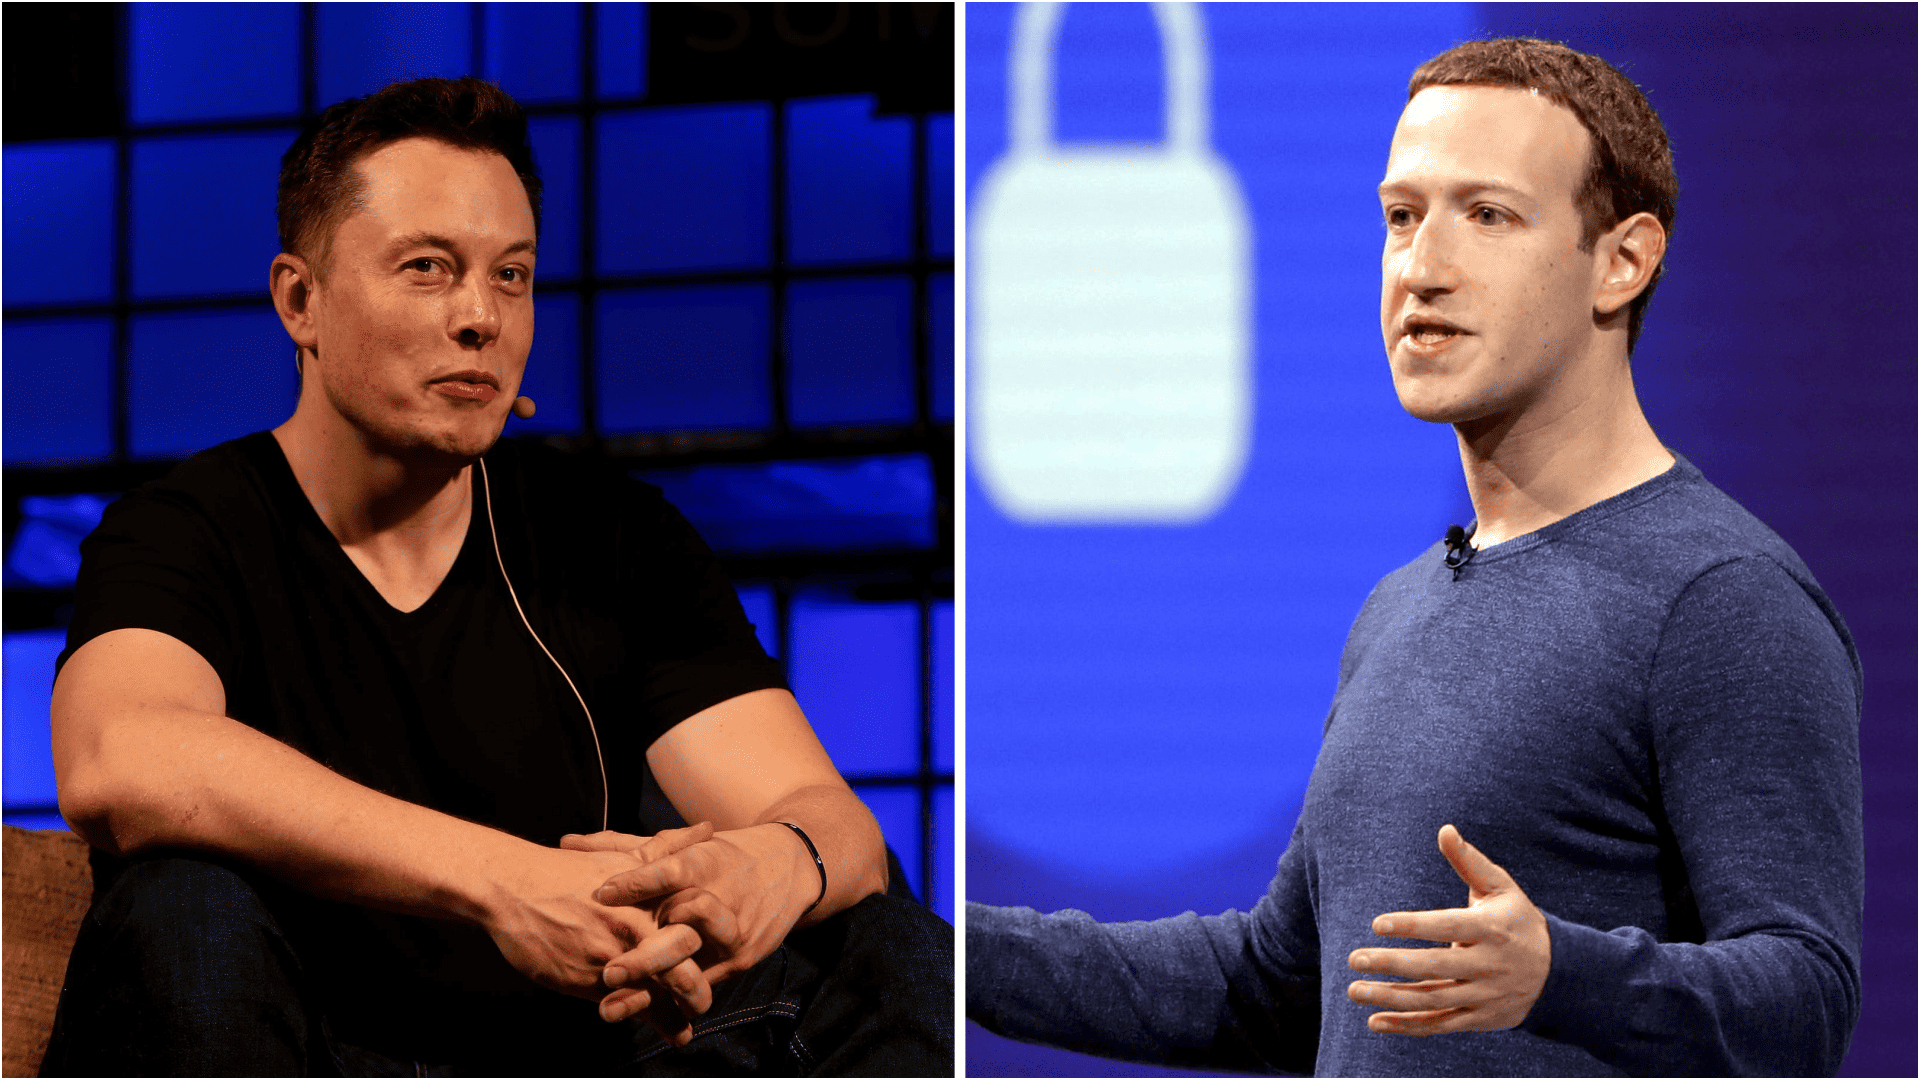 Elon Musk and Mark Zuckerberg agree to a cage fight